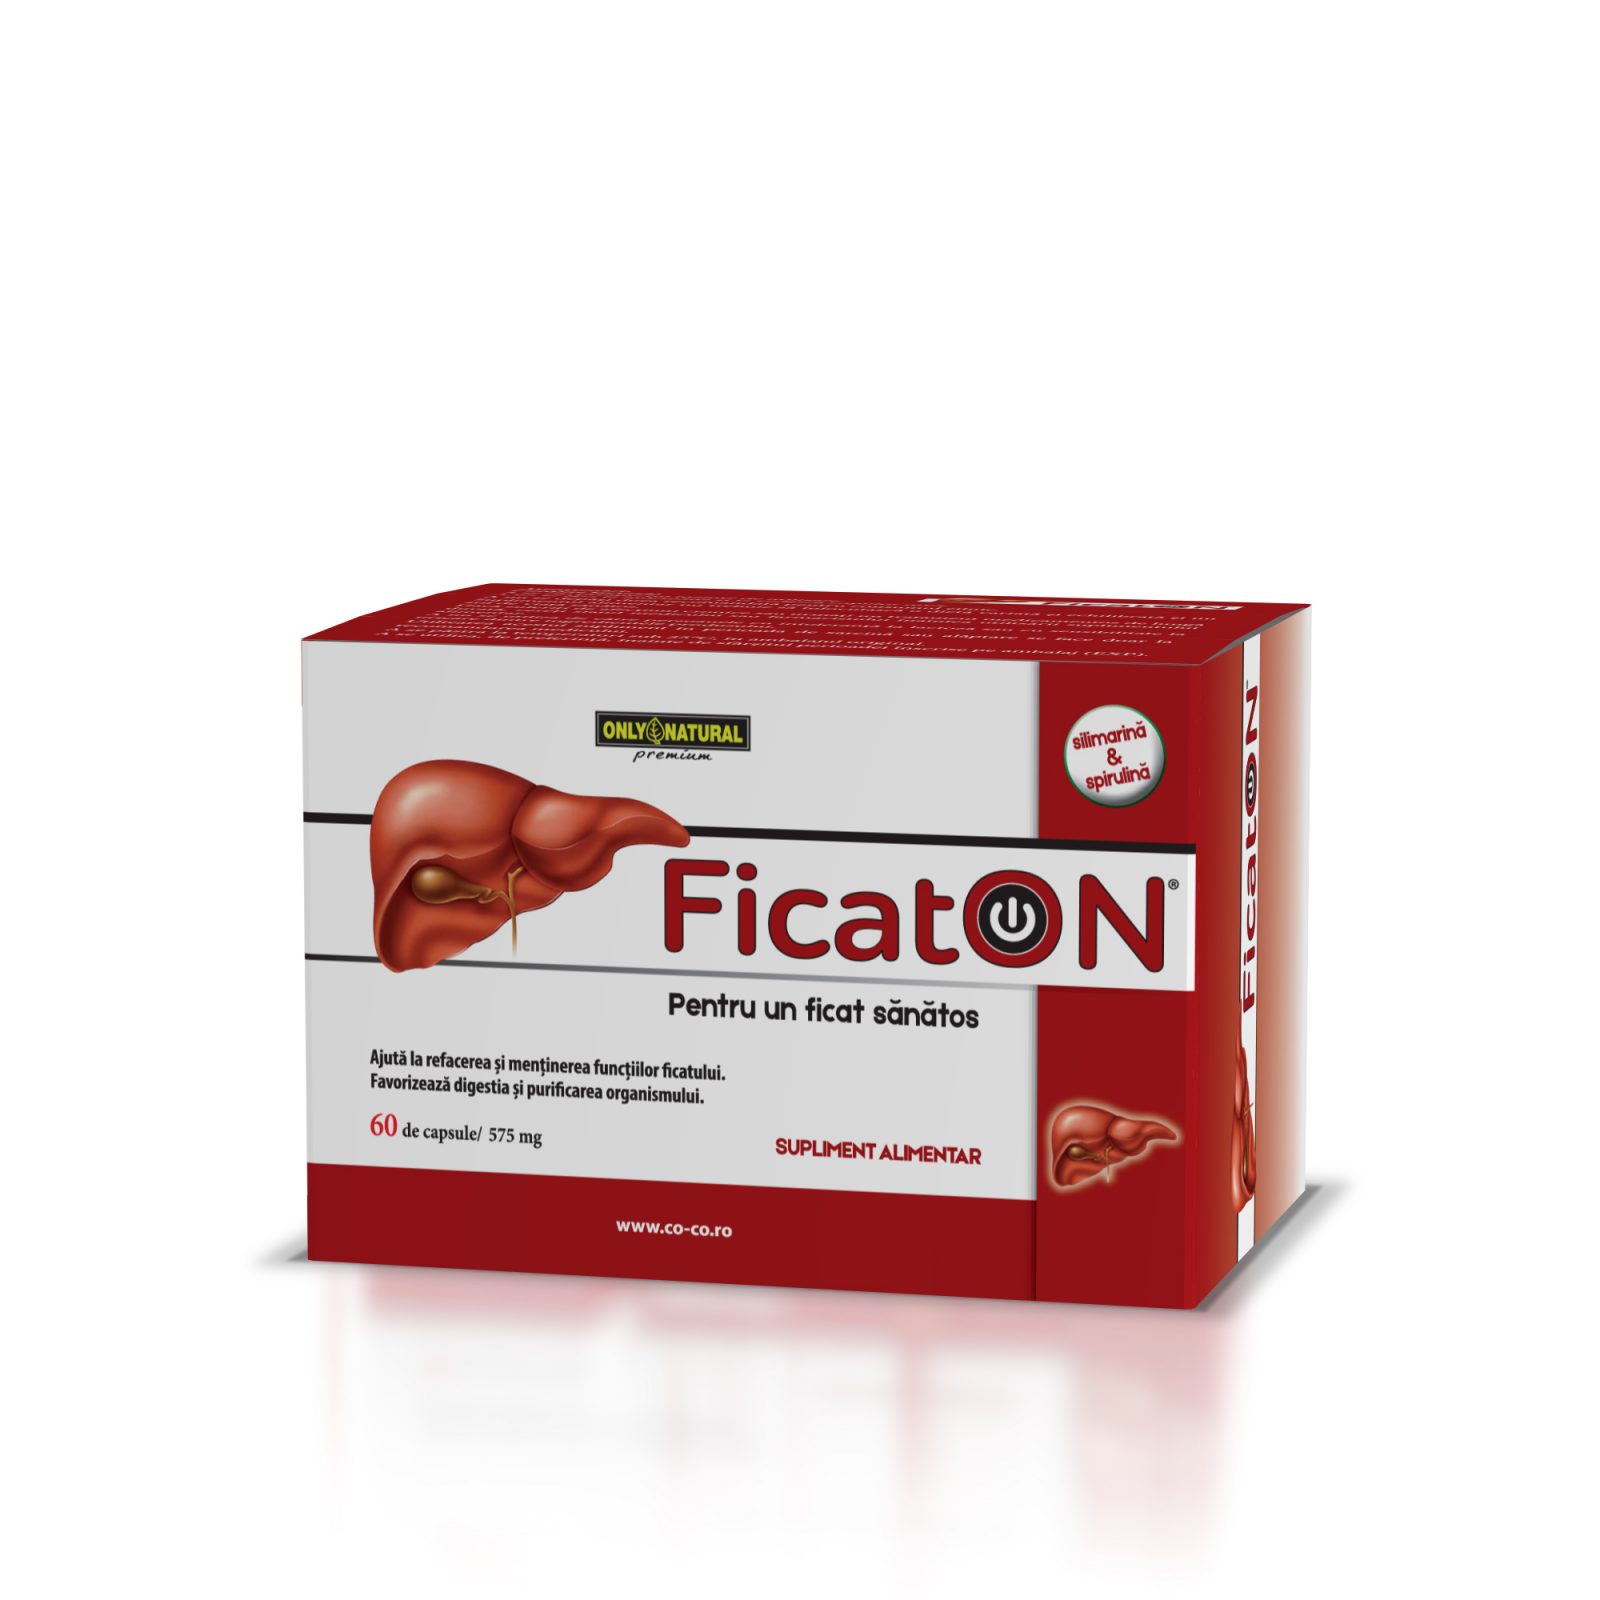 ONLY NATURAL FICATON 60 CAPSULE